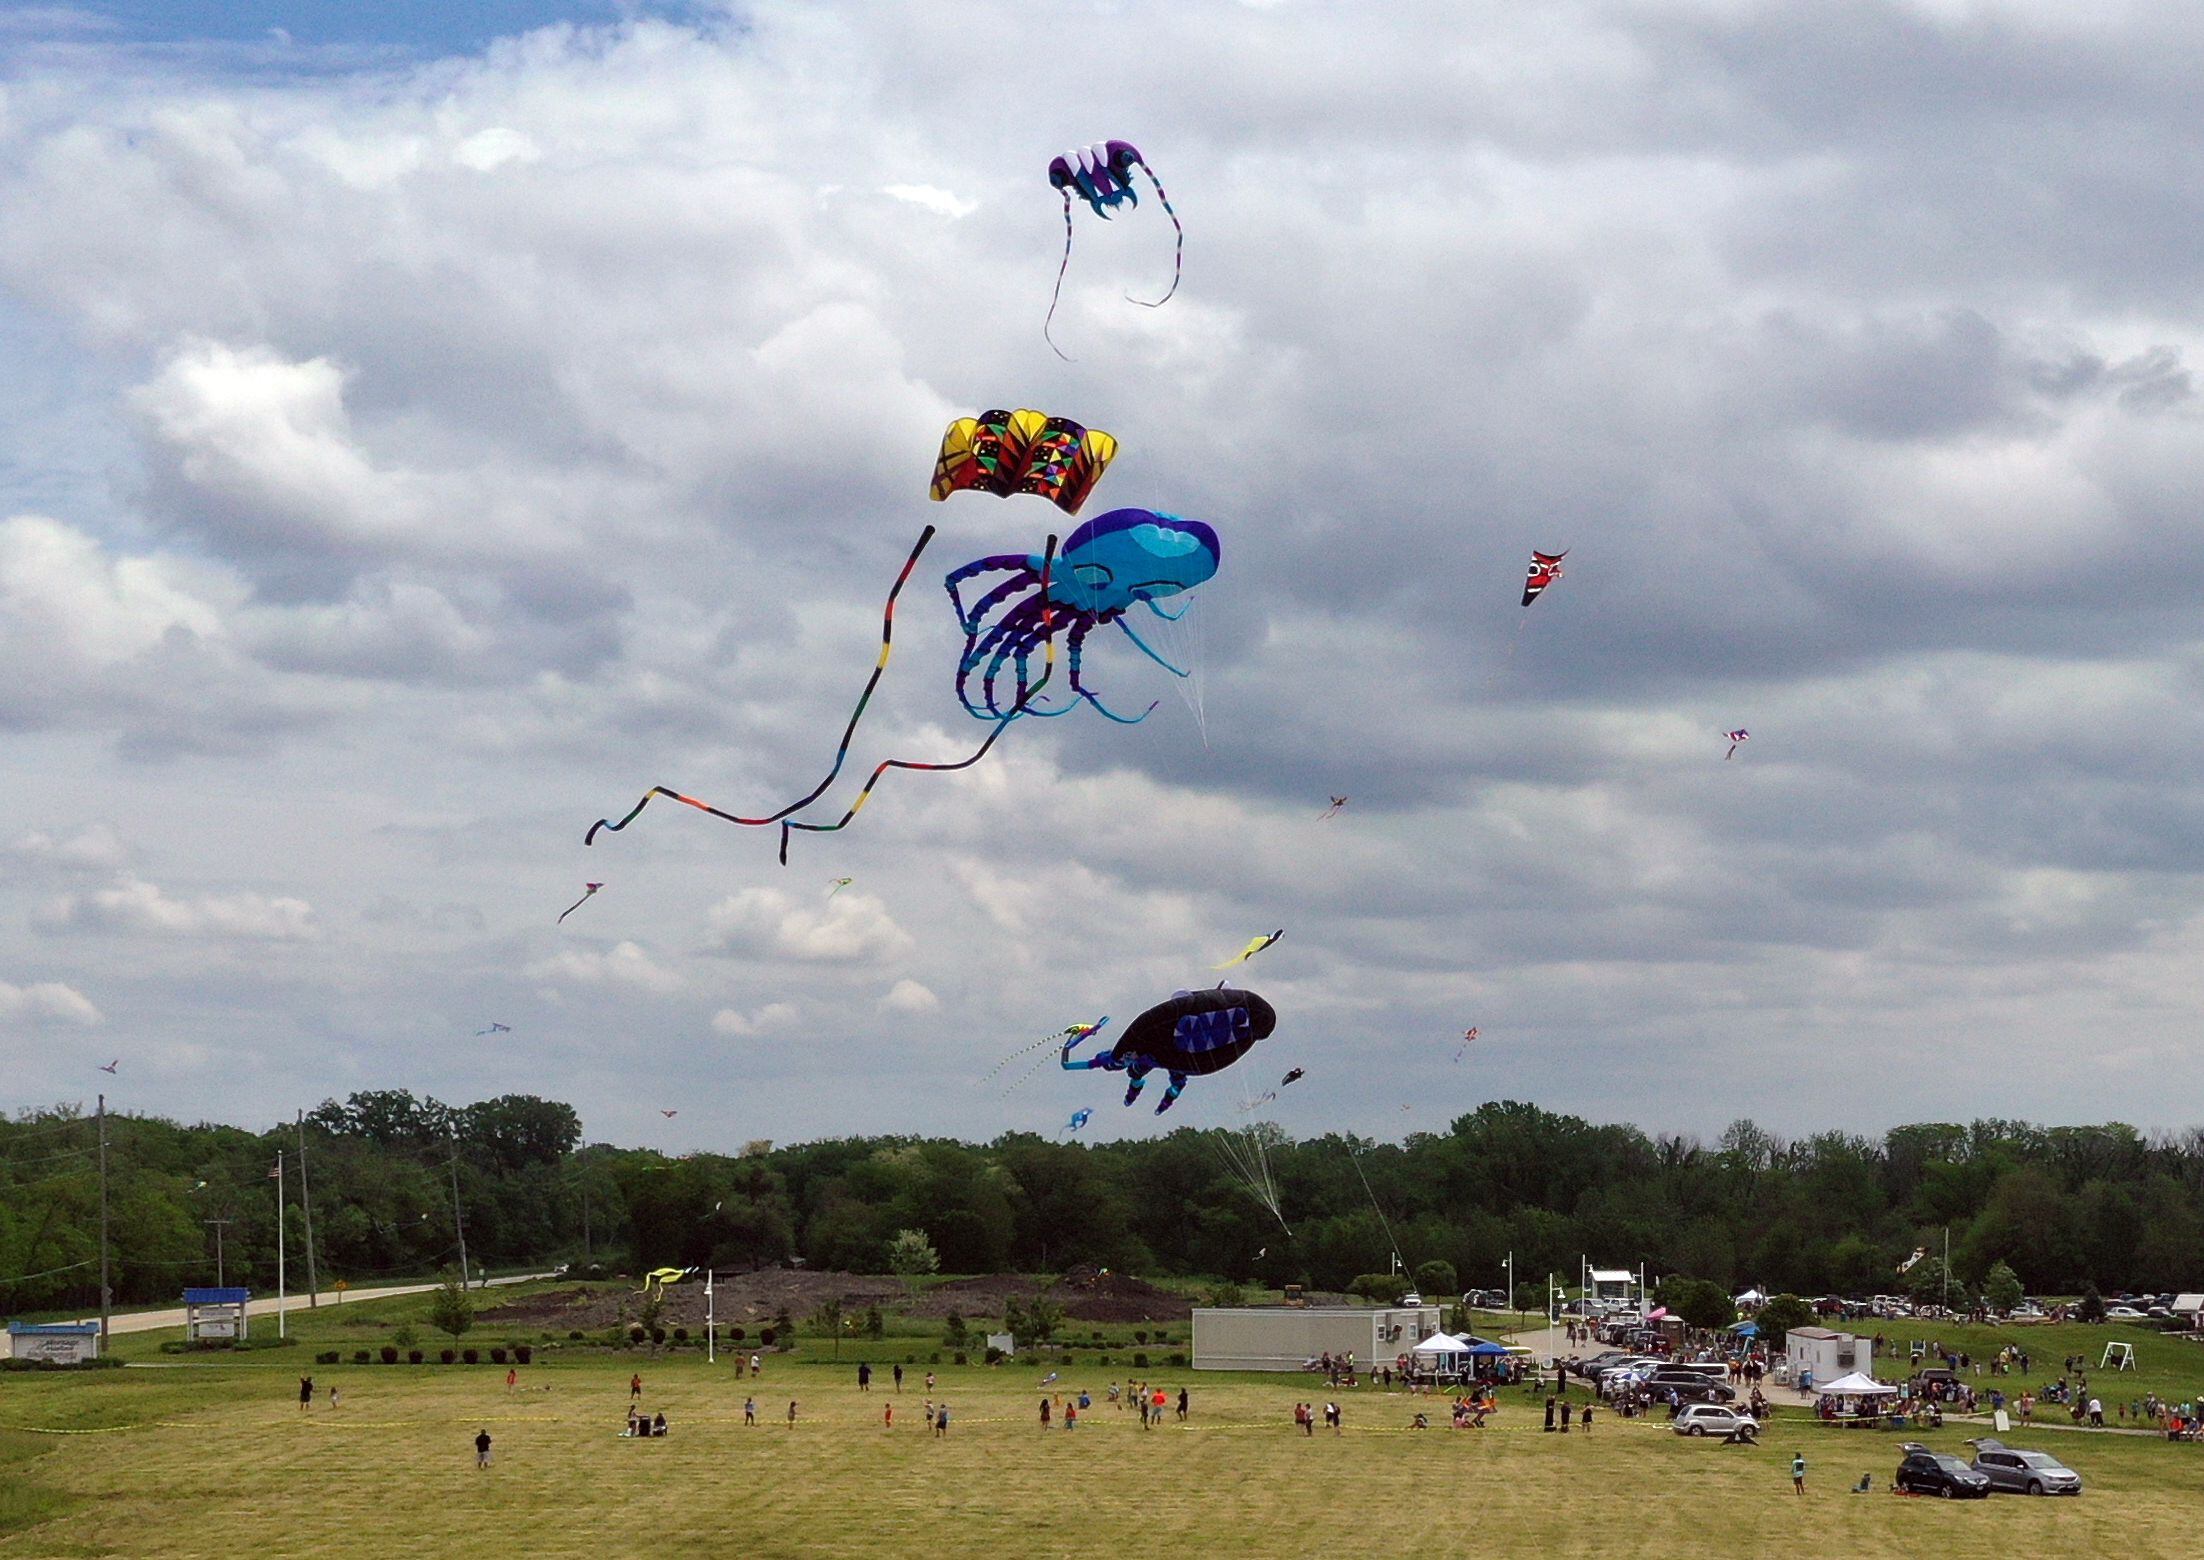 Kites fly above the "Kites in Flight" event at Heritage Harbor in Ottawa, on Sunday May 23, 2021.